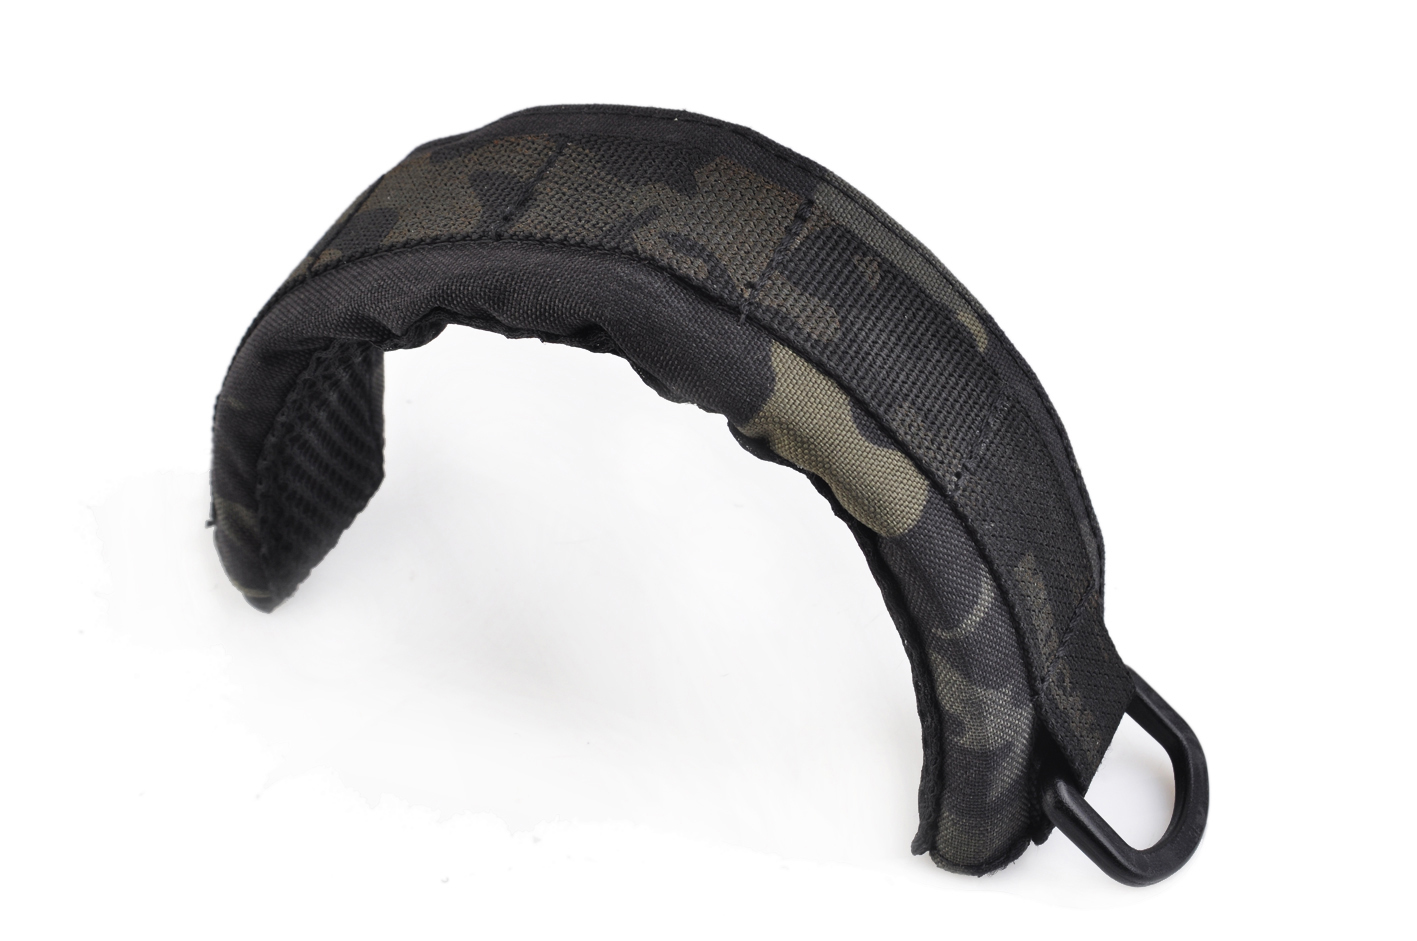 Headband Advanced Modular Headset Cover Pouch for All General Tactical Earmuffs 